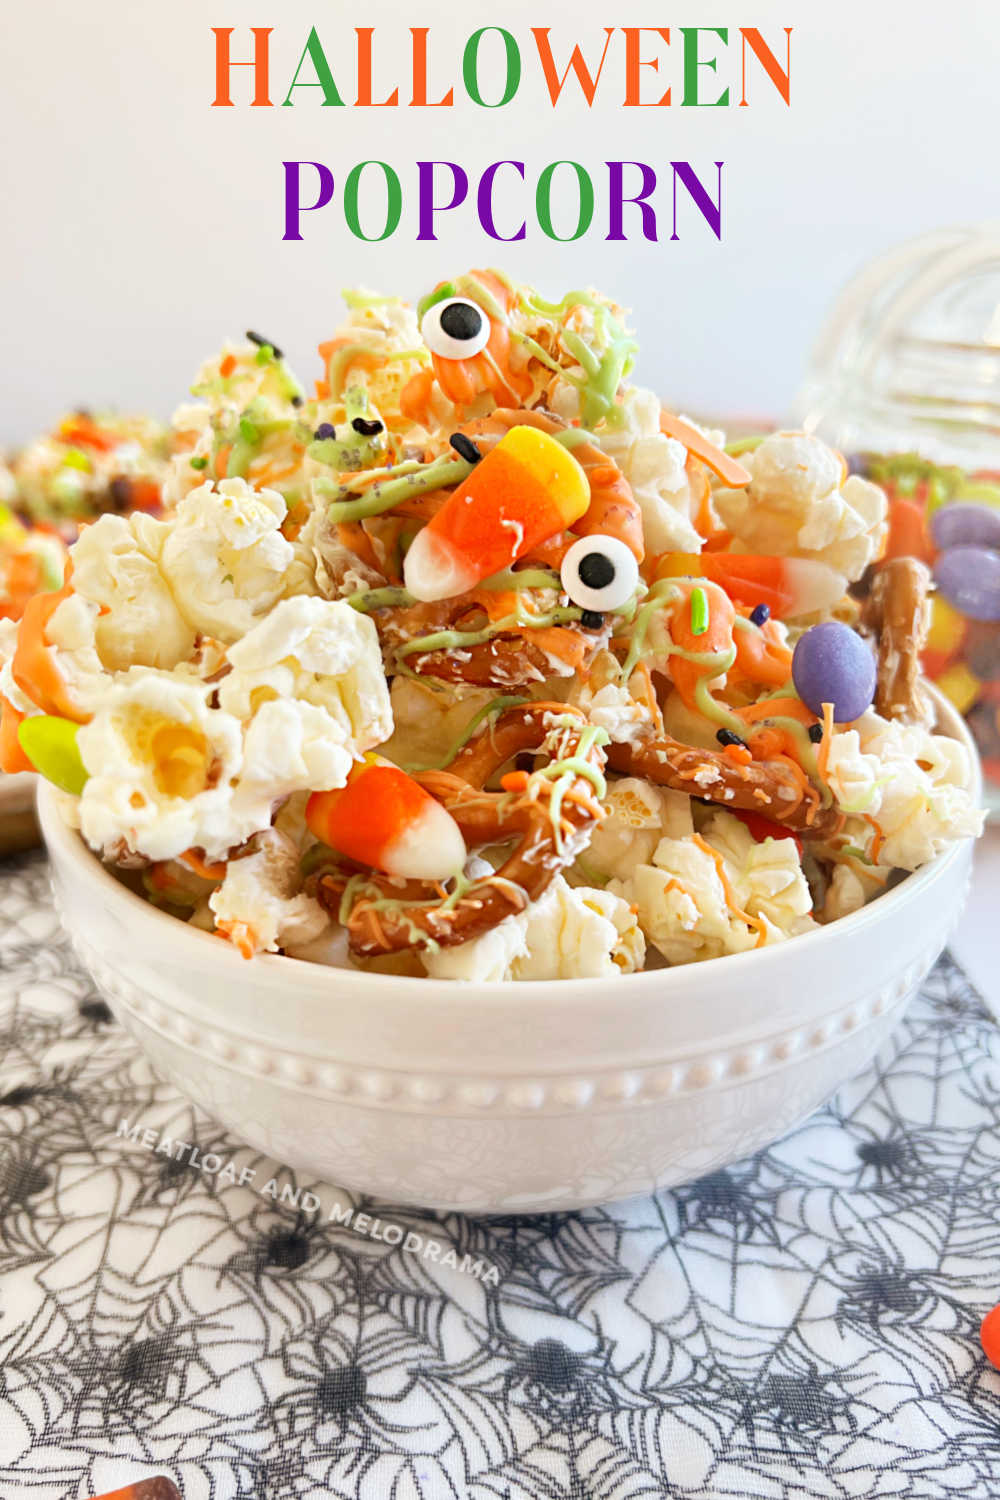 Monster Munch Halloween Popcorn recipe with white chocolate, pretzels, candy coating and candy is a fun treat for a Halloween party. Everyone loves this sweet and salty Halloween snack mix. via @meamel